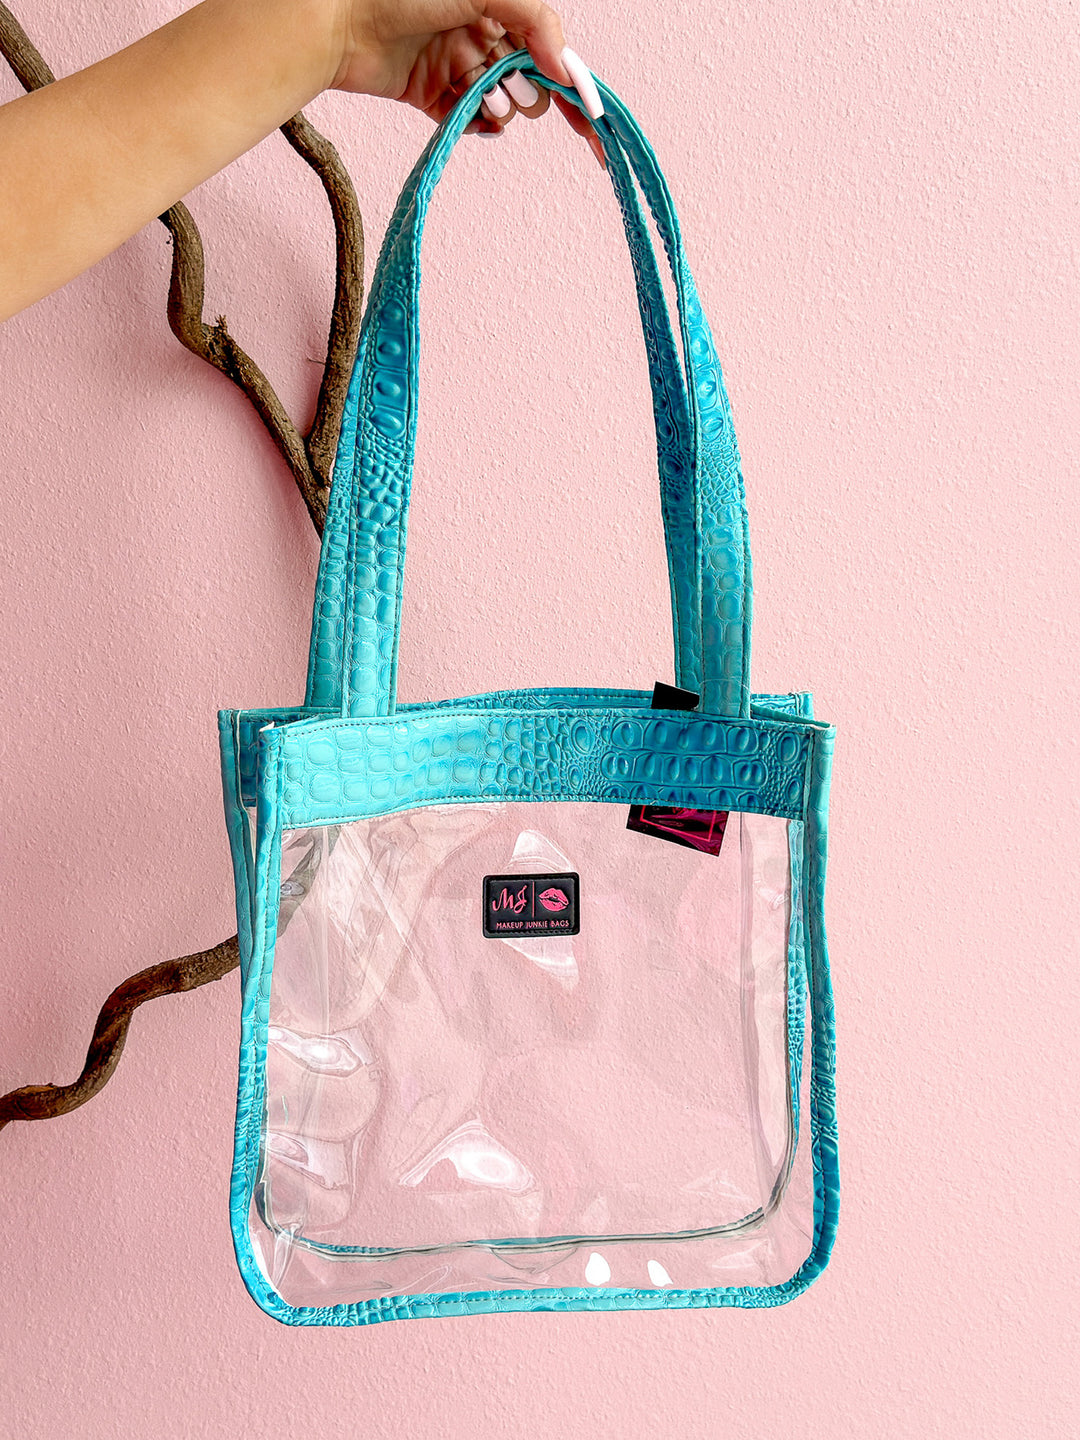 Makeup Junkie Bags - In the Clear Tiffany Bubble Gator Tote Mini [Ready to Ship]